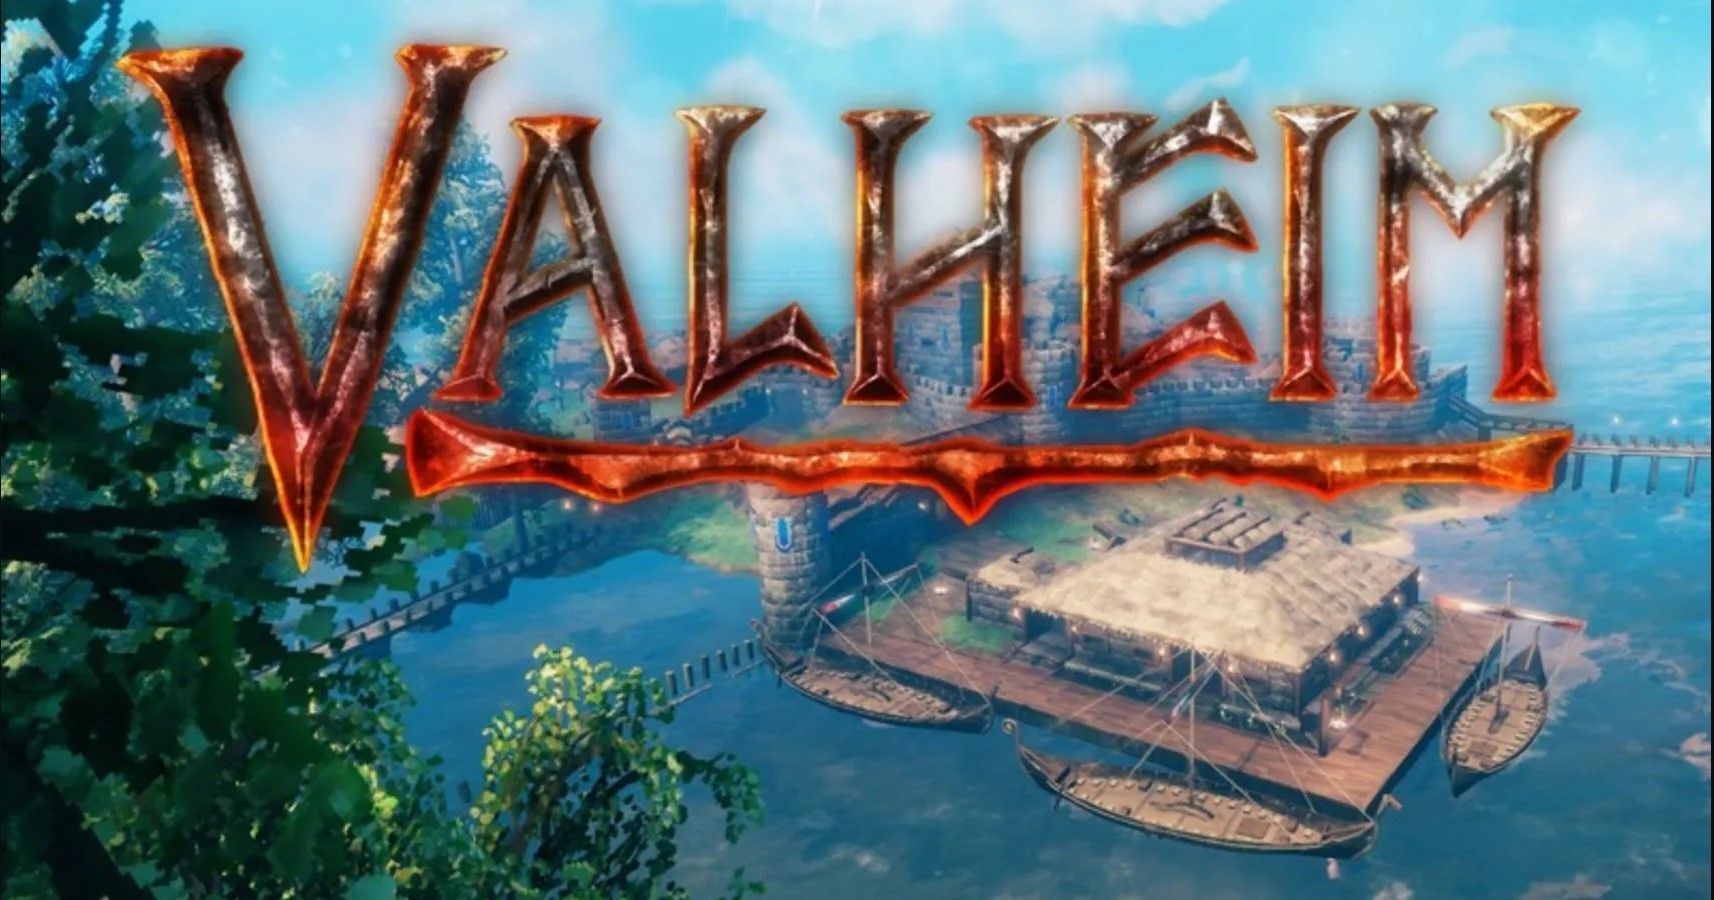 Valheim text in front of a small fishing town